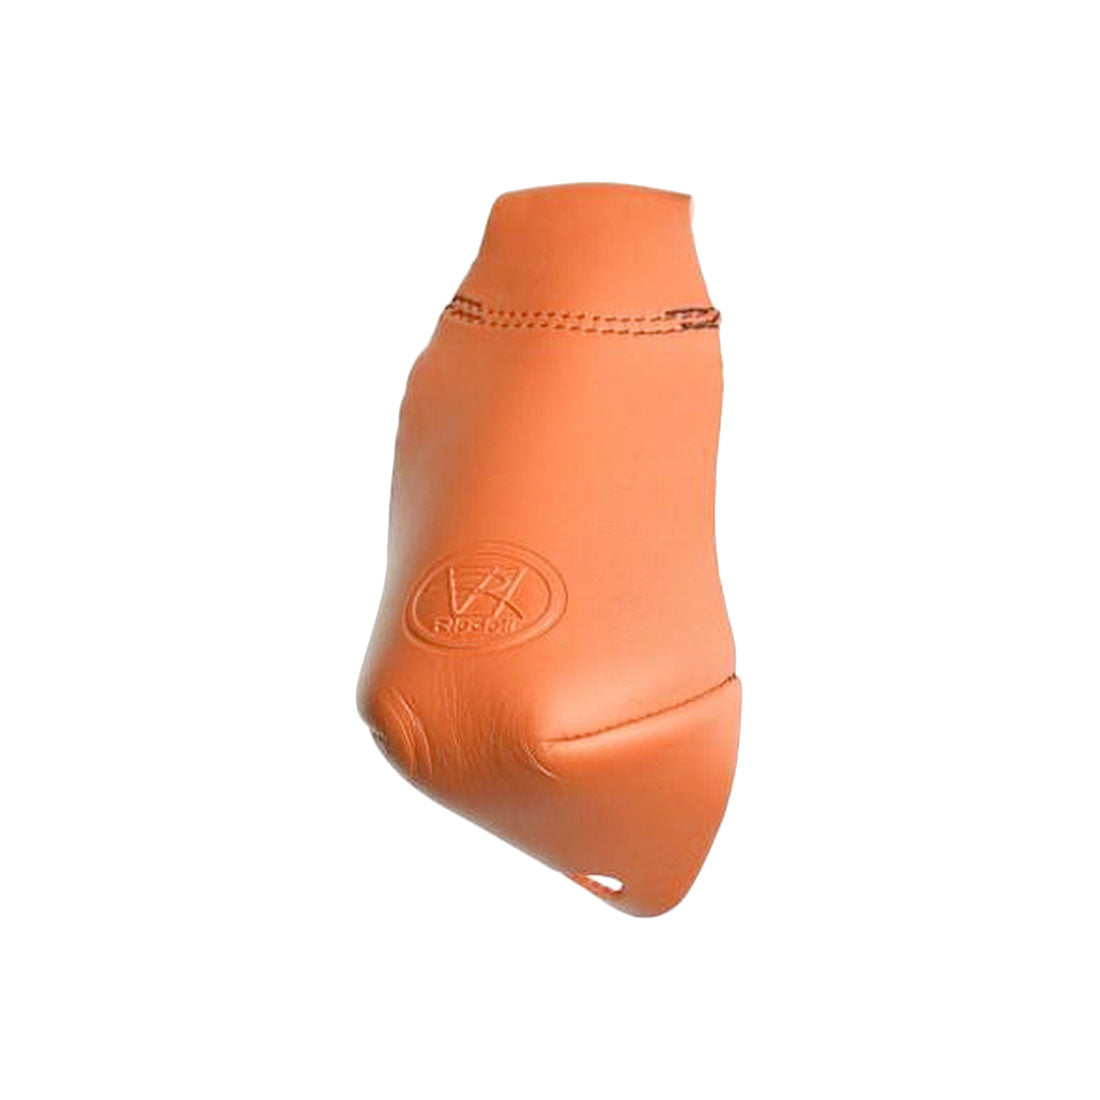 Riedell Toe Cap Pro Fit 2pk - Leather Orange Roller Skate Hardware and Parts